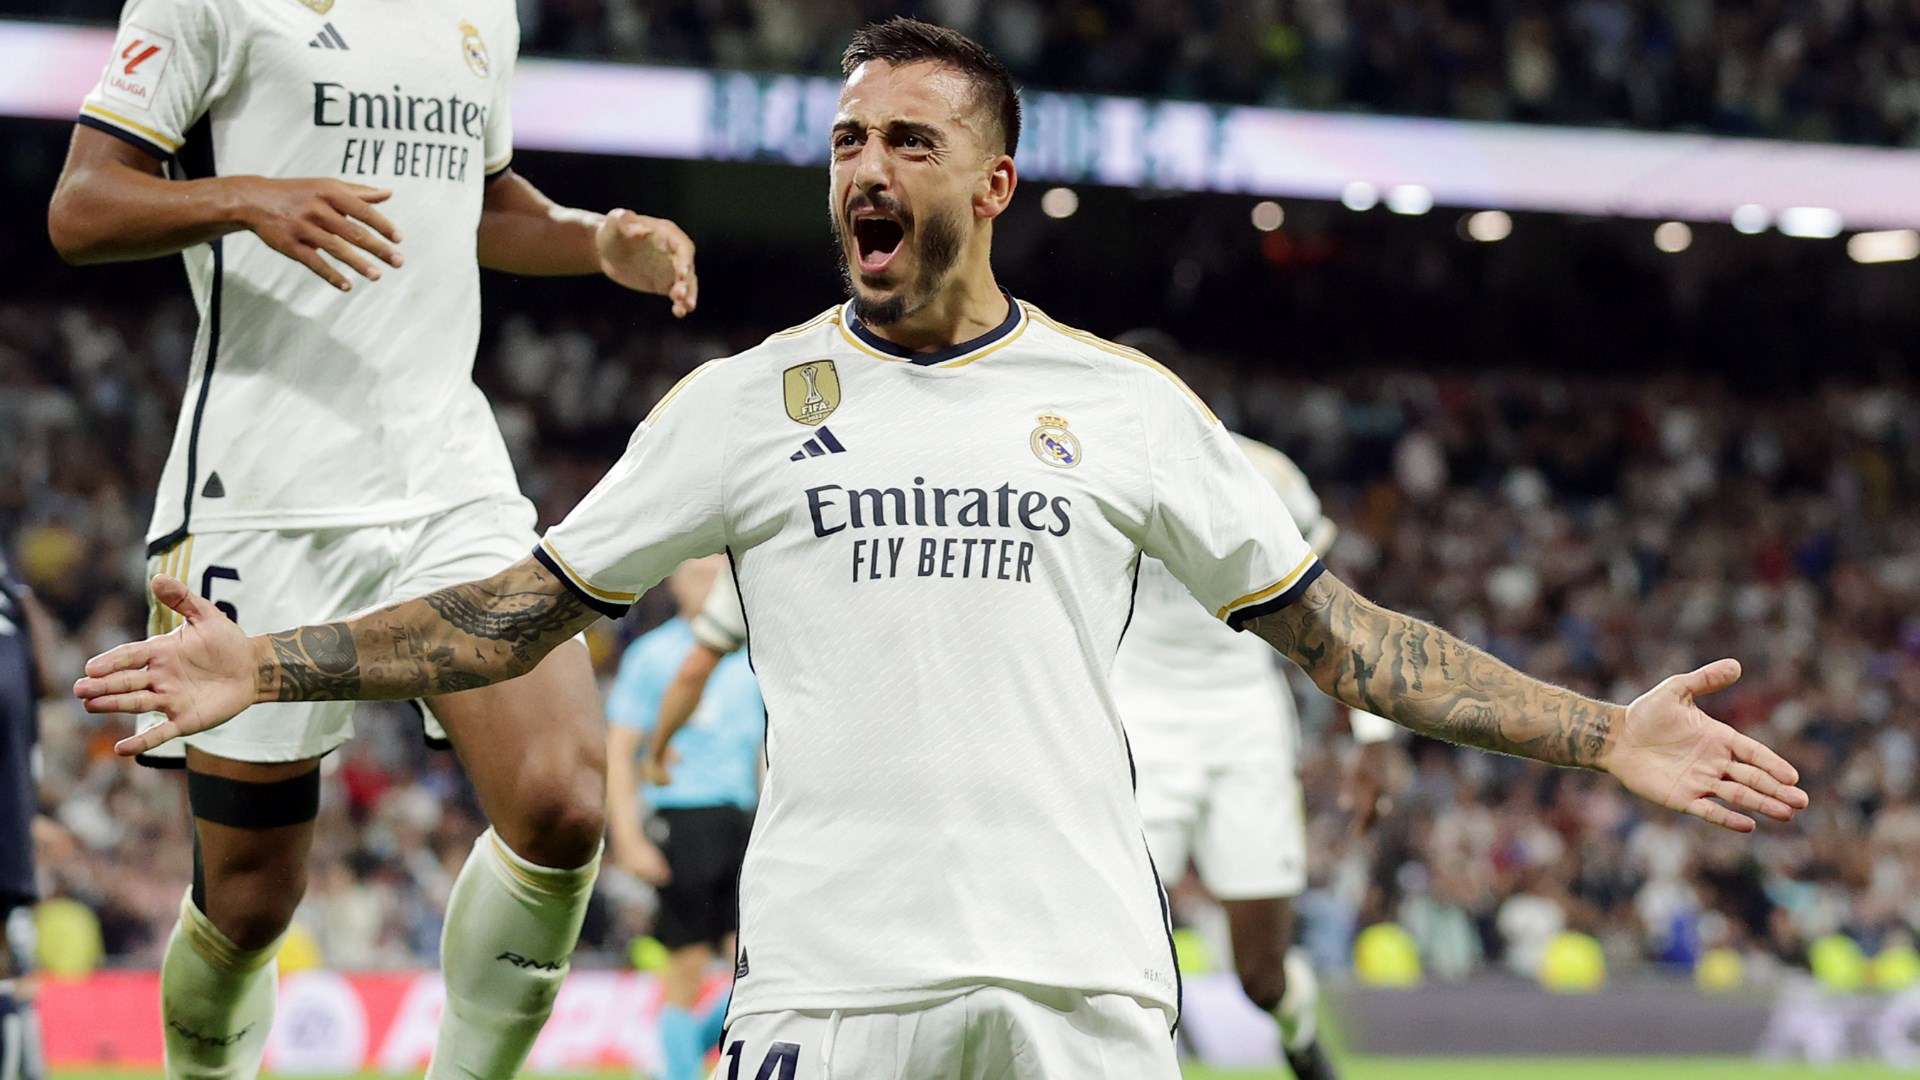 Joselu is much more than just a Newcastle flop - he's key to Real Madrid's  trophy hunt this season | Goal.com